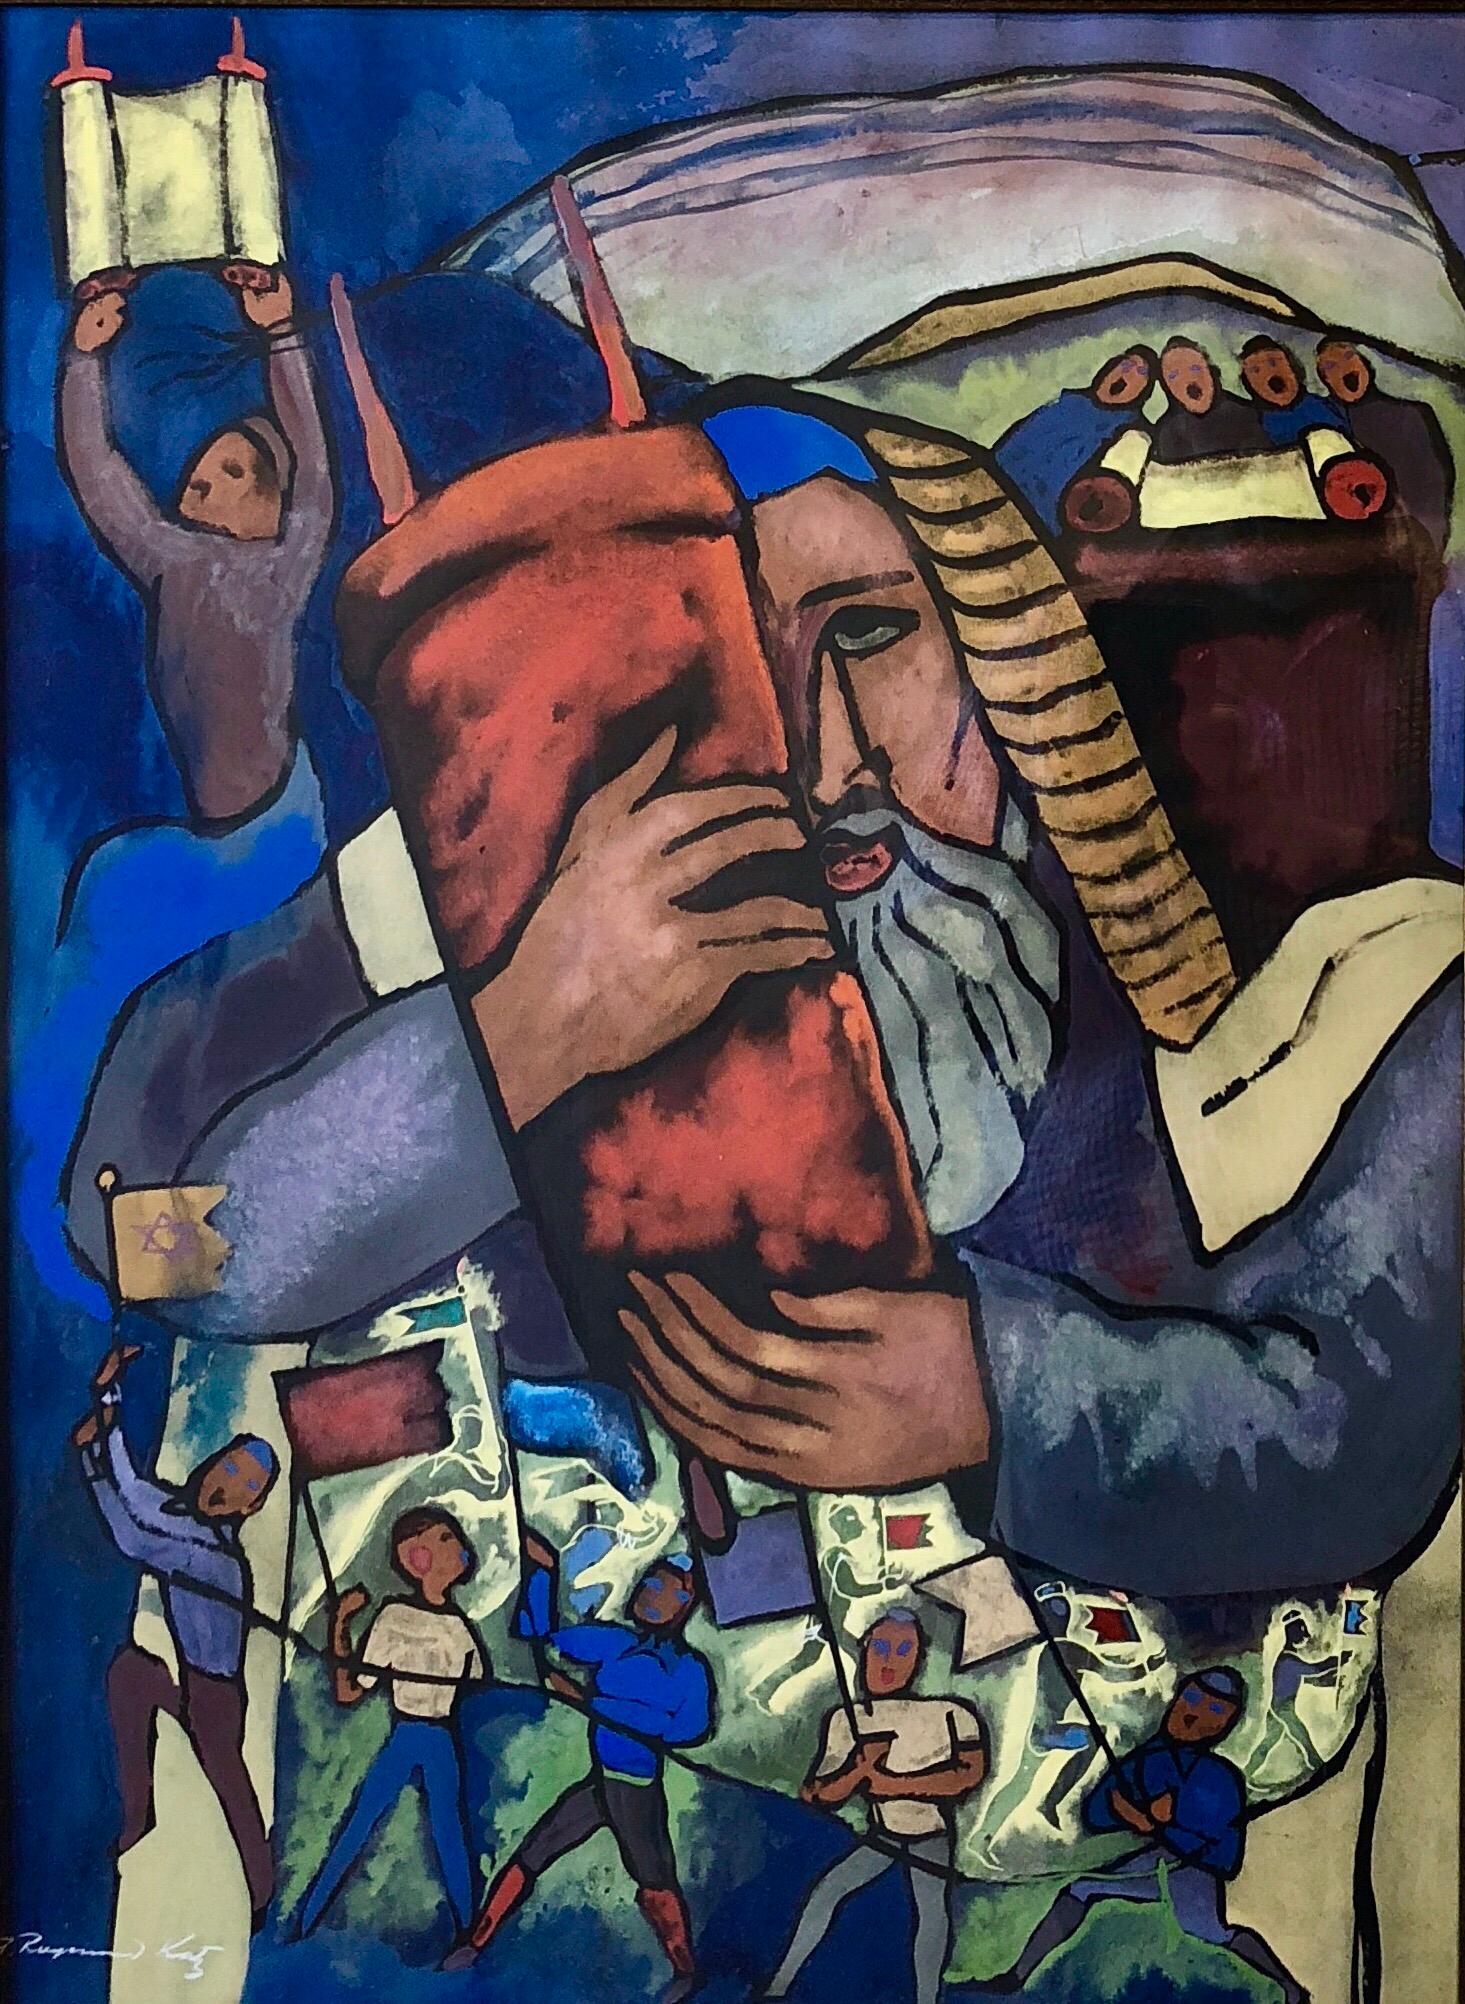 This has young ISraeli pioneers dancing with the flag as typical of works of the late British mandate Palestine era early state of Israel. 
Genre: Modern
Subject: Figurative (stained glass style)
Medium: Mixed media gouache on paper
Hand signed